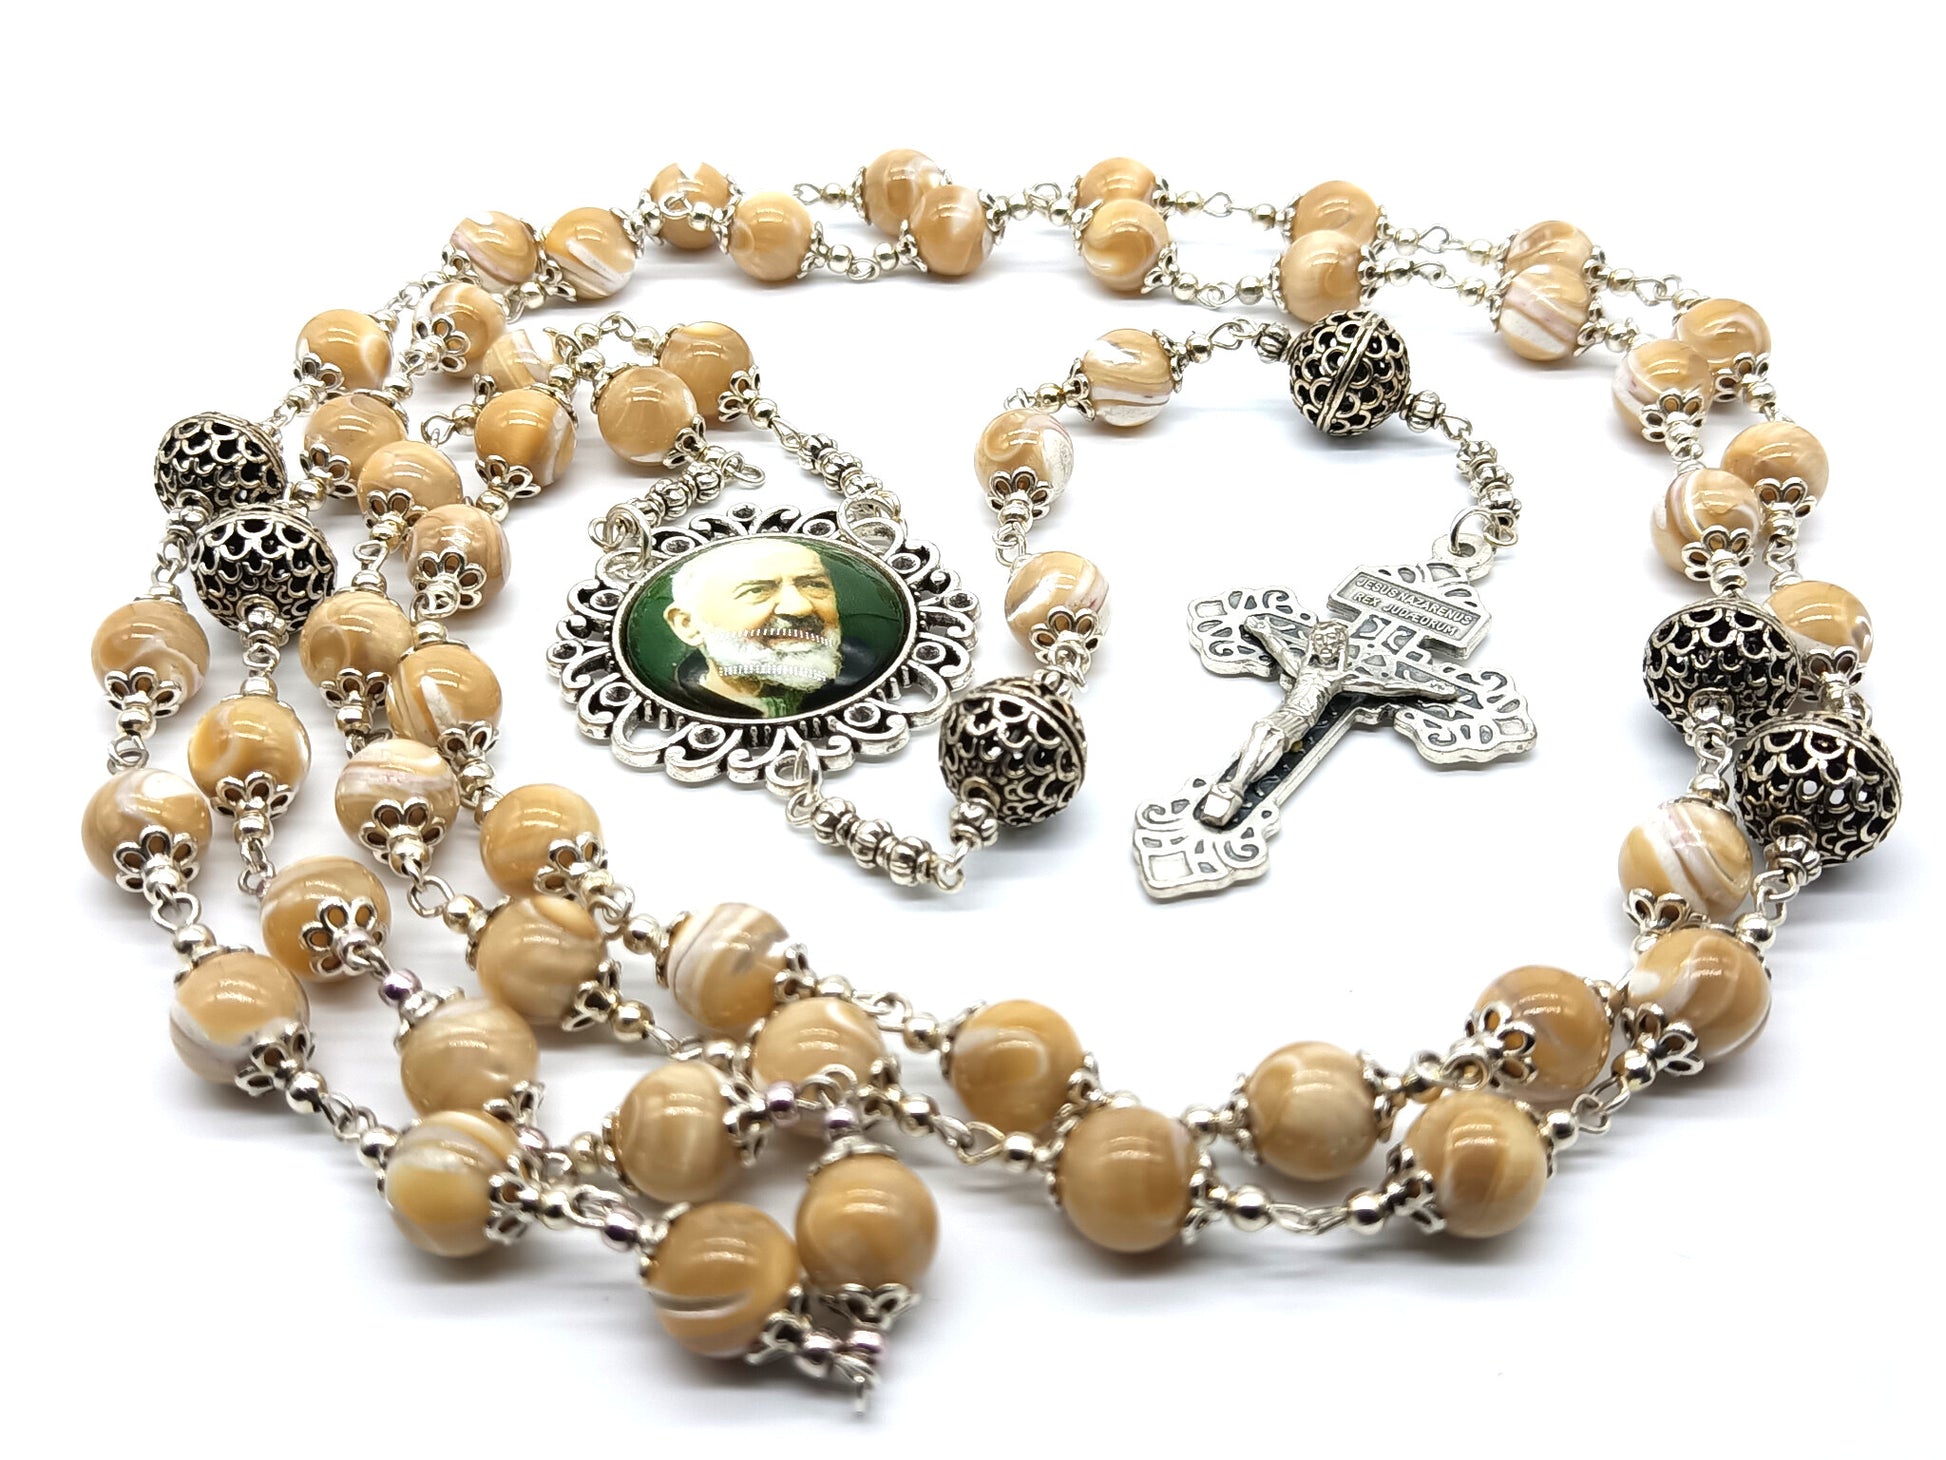 Saint Padre Pio unique rosary beads with mother of pearl beads, silver pater beads, crucifix and picture centre medal.